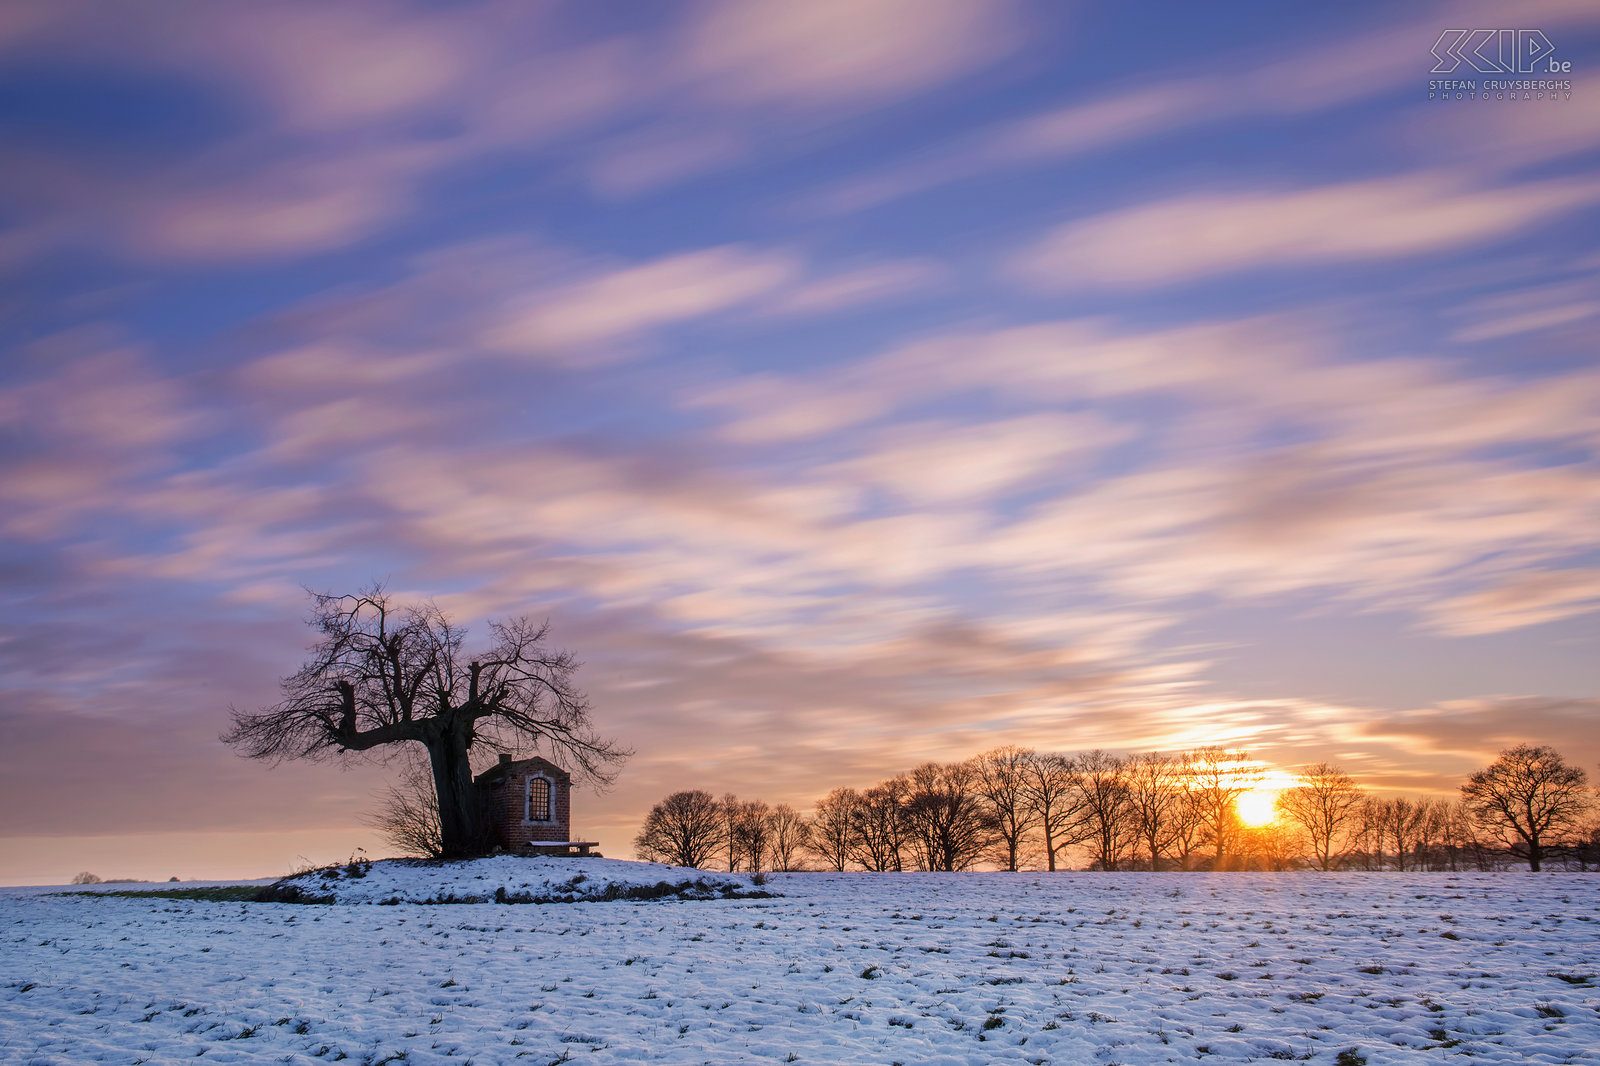 Winter in Sint-Pieters-Rode - Sunset at the chapel The small chapel of Saint Joseph is located in a field under an old linden tree nearby the castle of Horst (Sint-Pieters-Rode, Belgium). It has been built in the beginning of the 19th century. This long exposure shot is made a sunset.<br />
 Stefan Cruysberghs